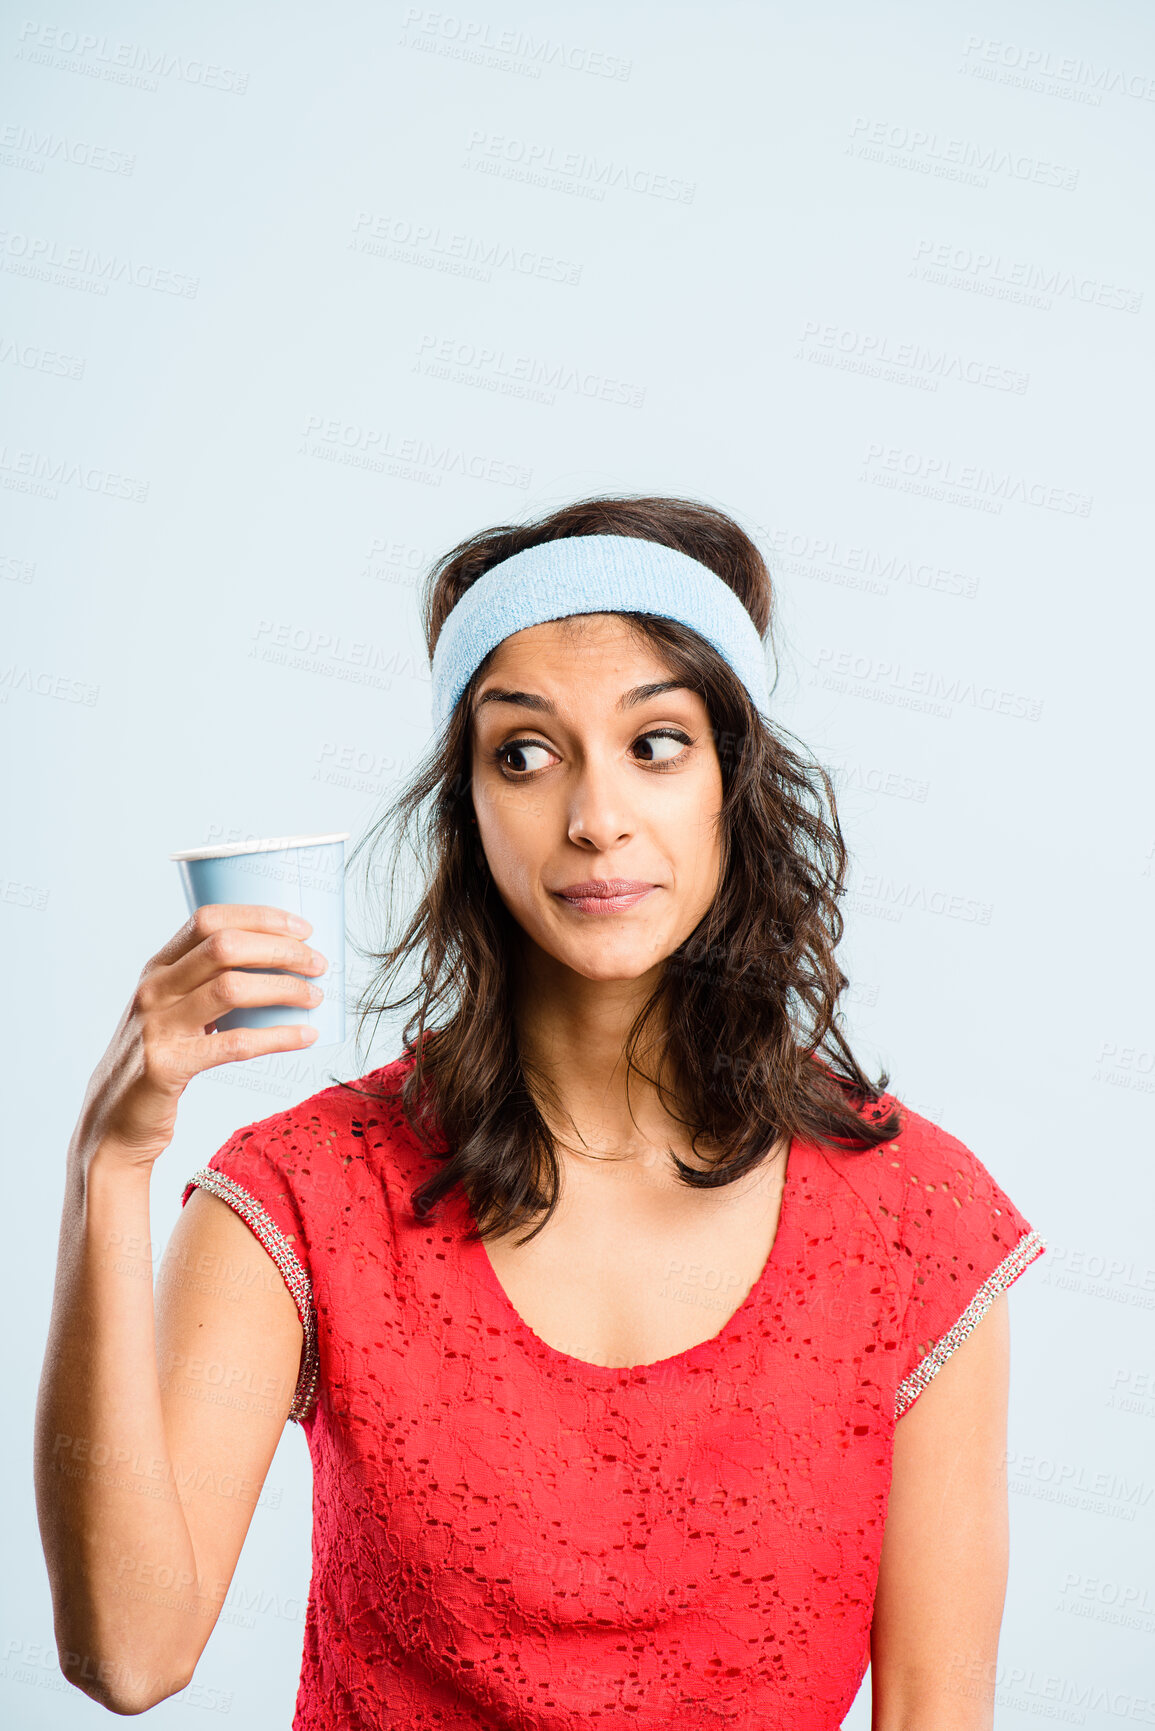 Buy stock photo Shot of a young woman standing in the studio and posing while wearing a headband and holding a coffee cup